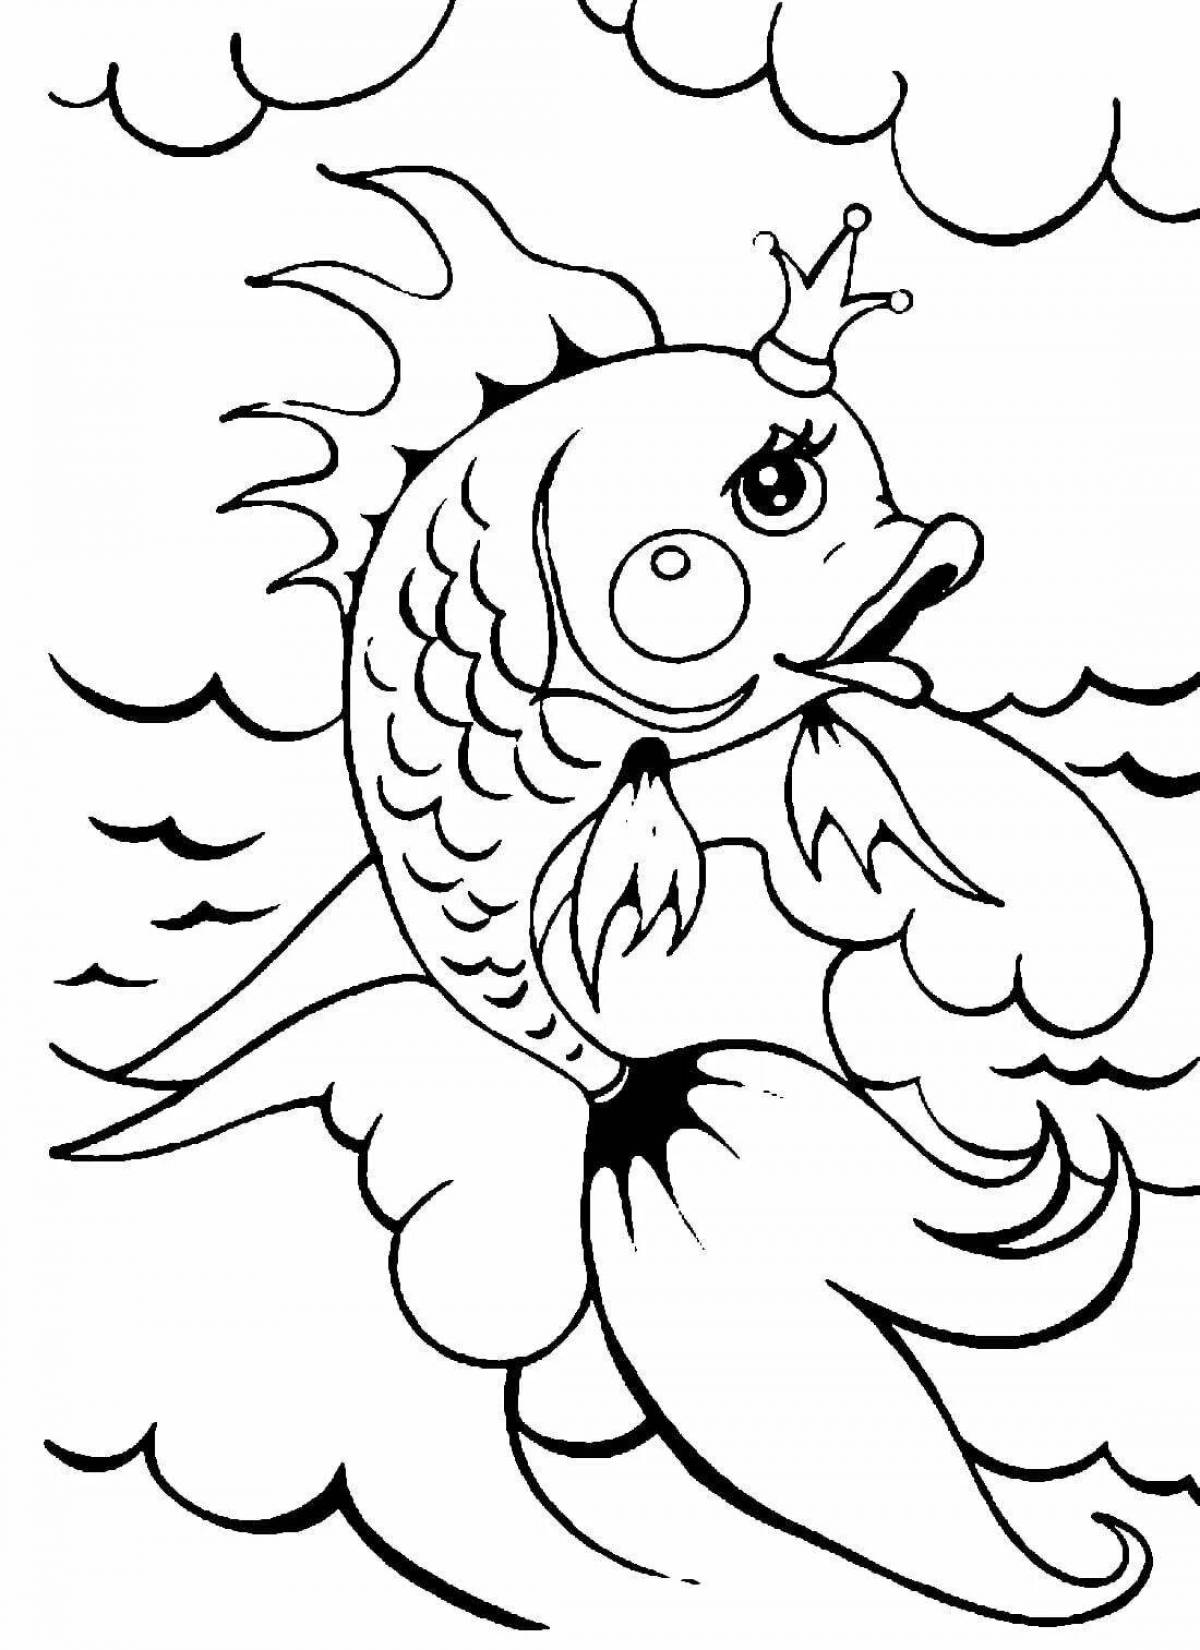 Coloring page dazzling goldfish